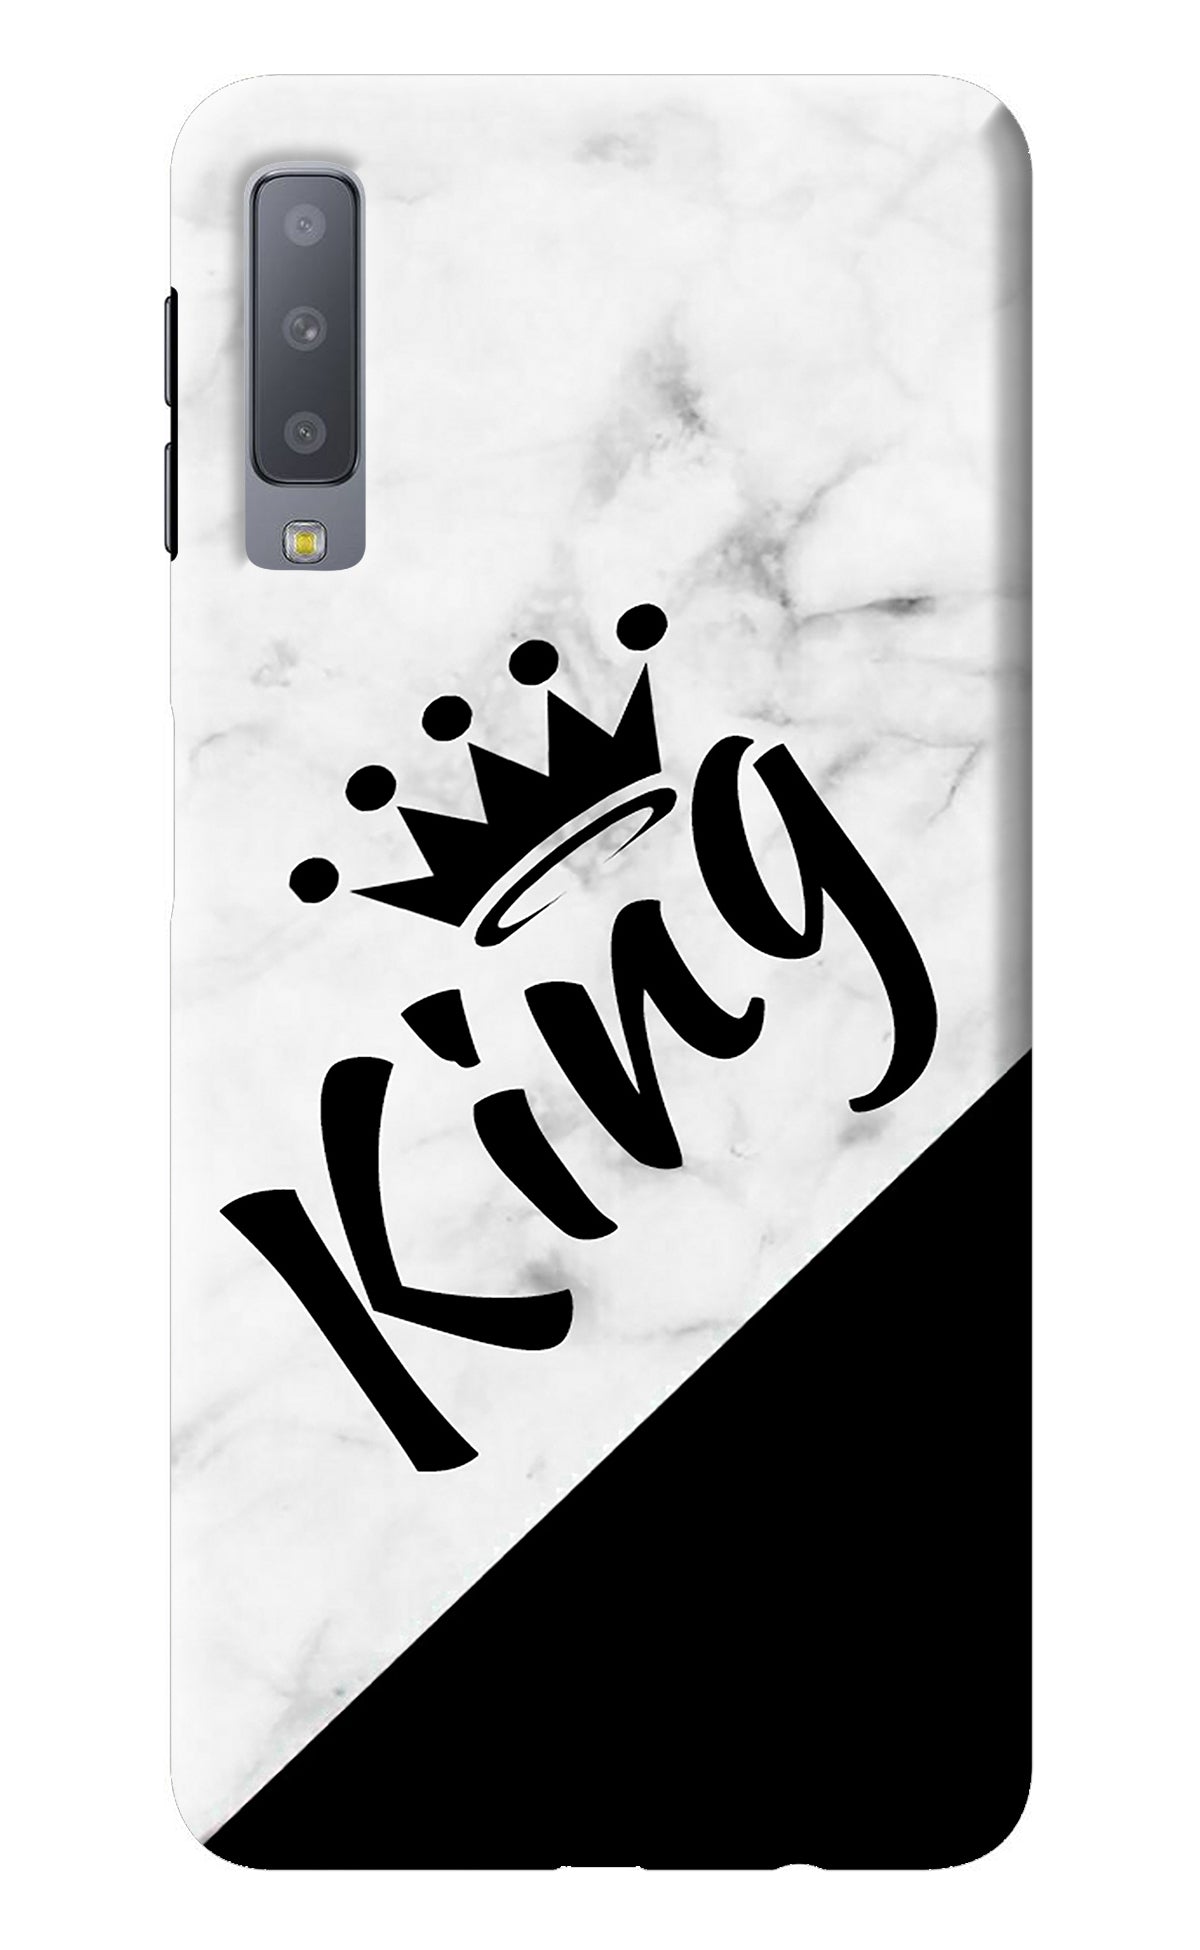 King Samsung A7 Back Cover